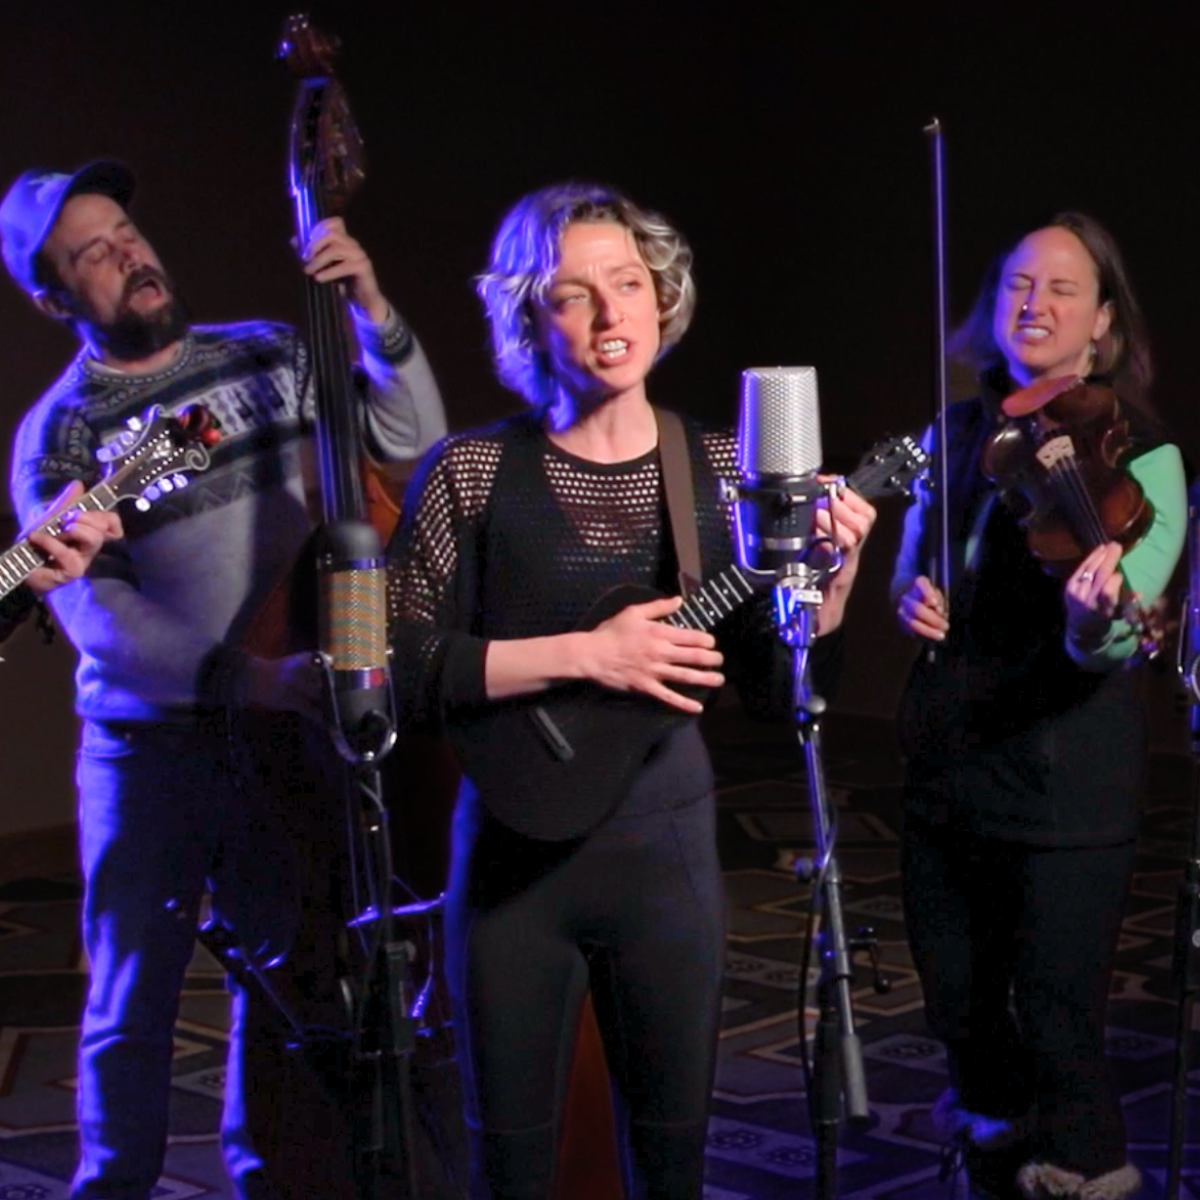 BGS + Sixthman Sessions at Sea: Black Opry Revue, “You're Not Alone